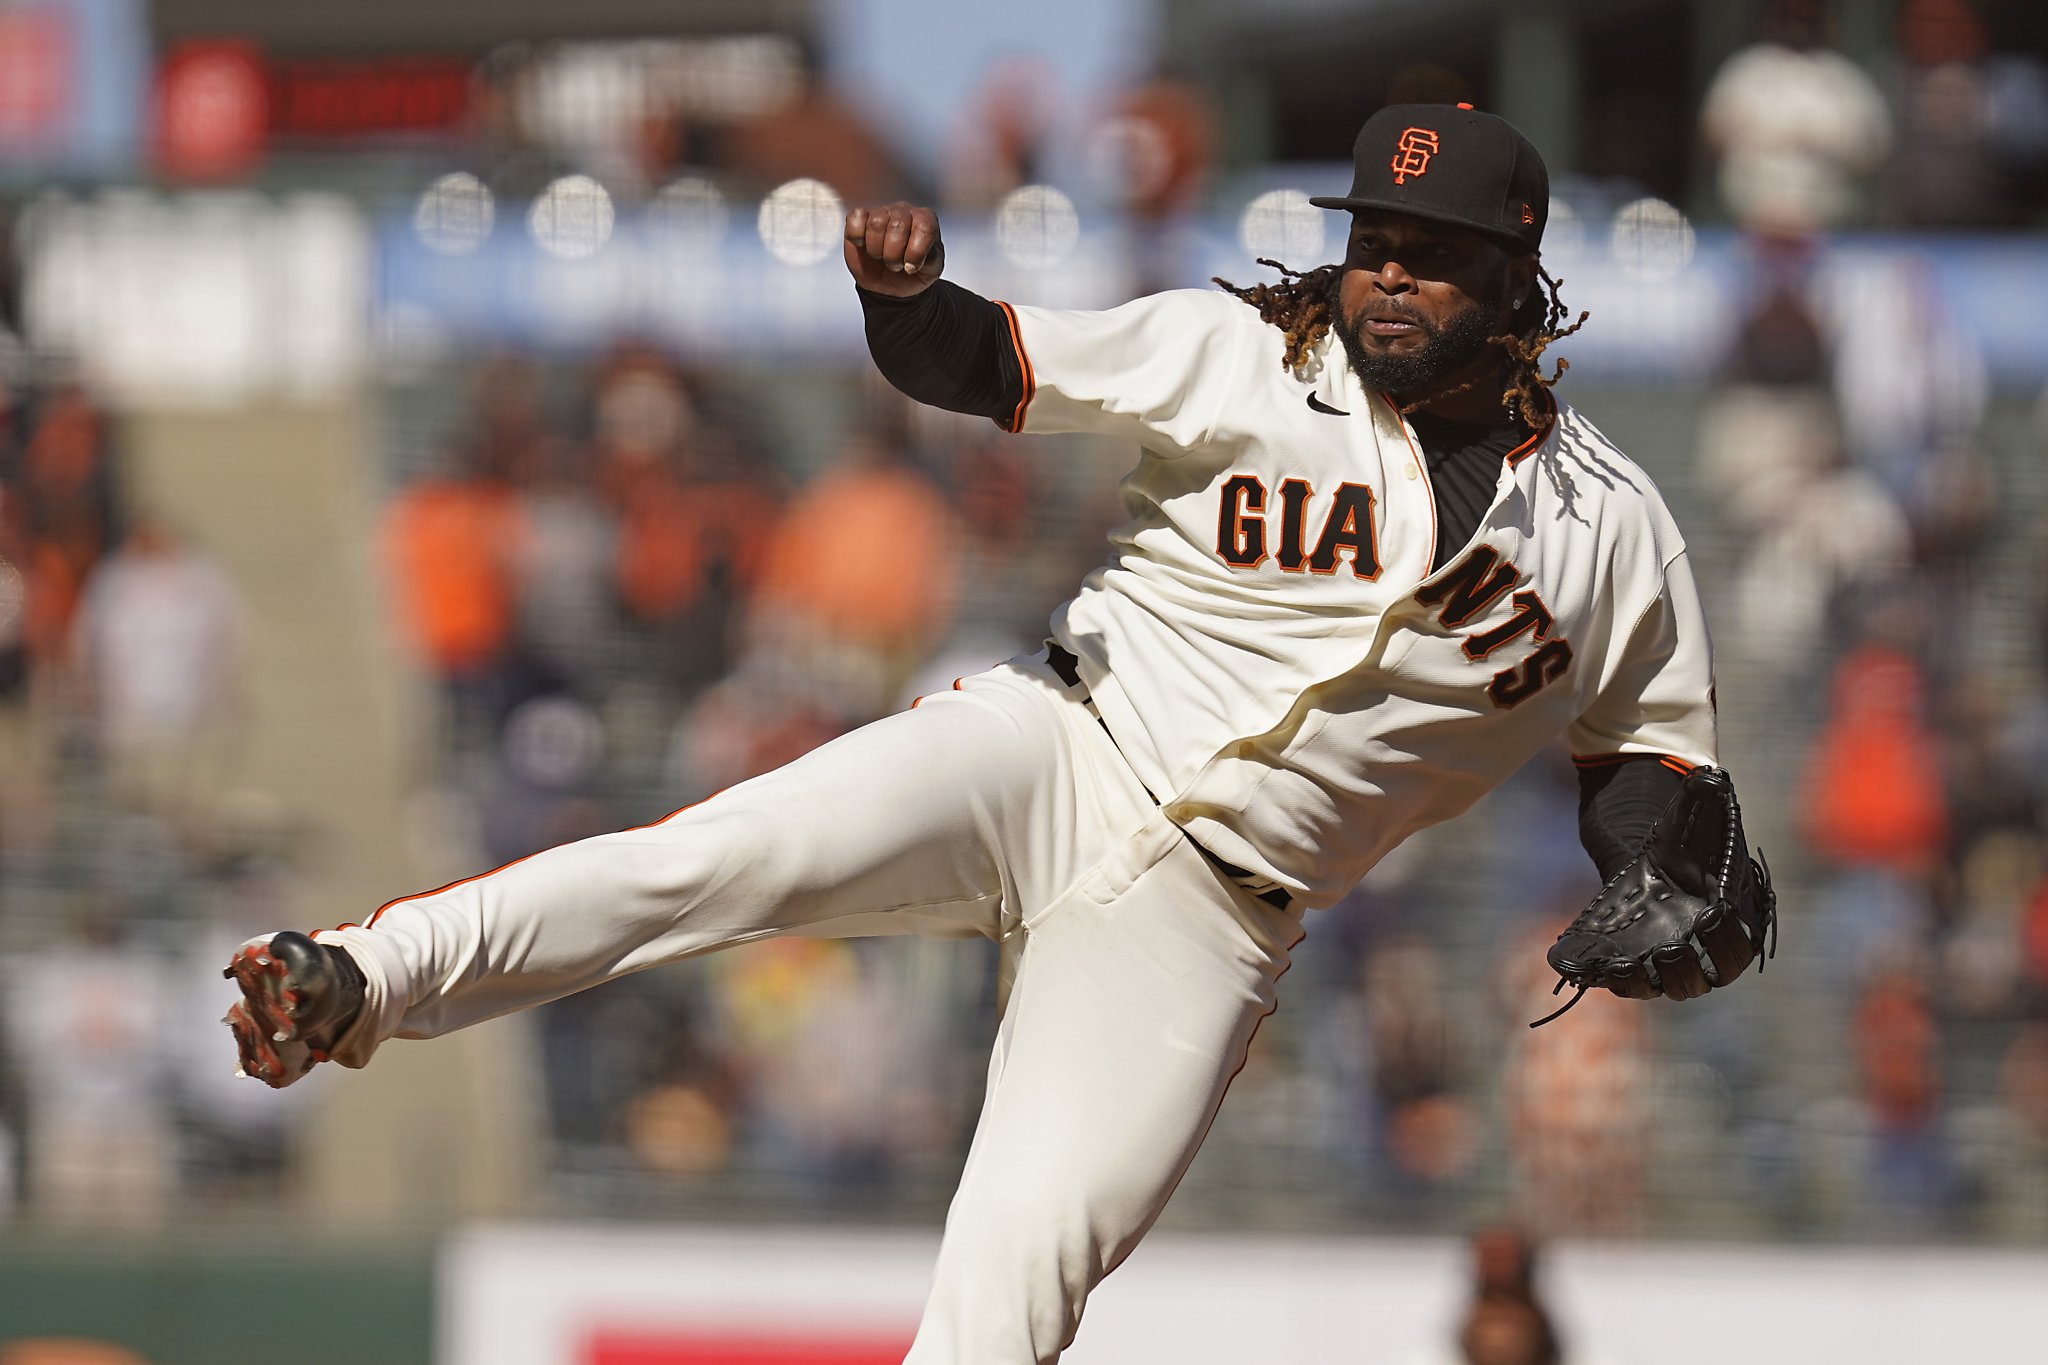 Giants' Johnny Cueto to come off IL, pitch Sunday; Mike